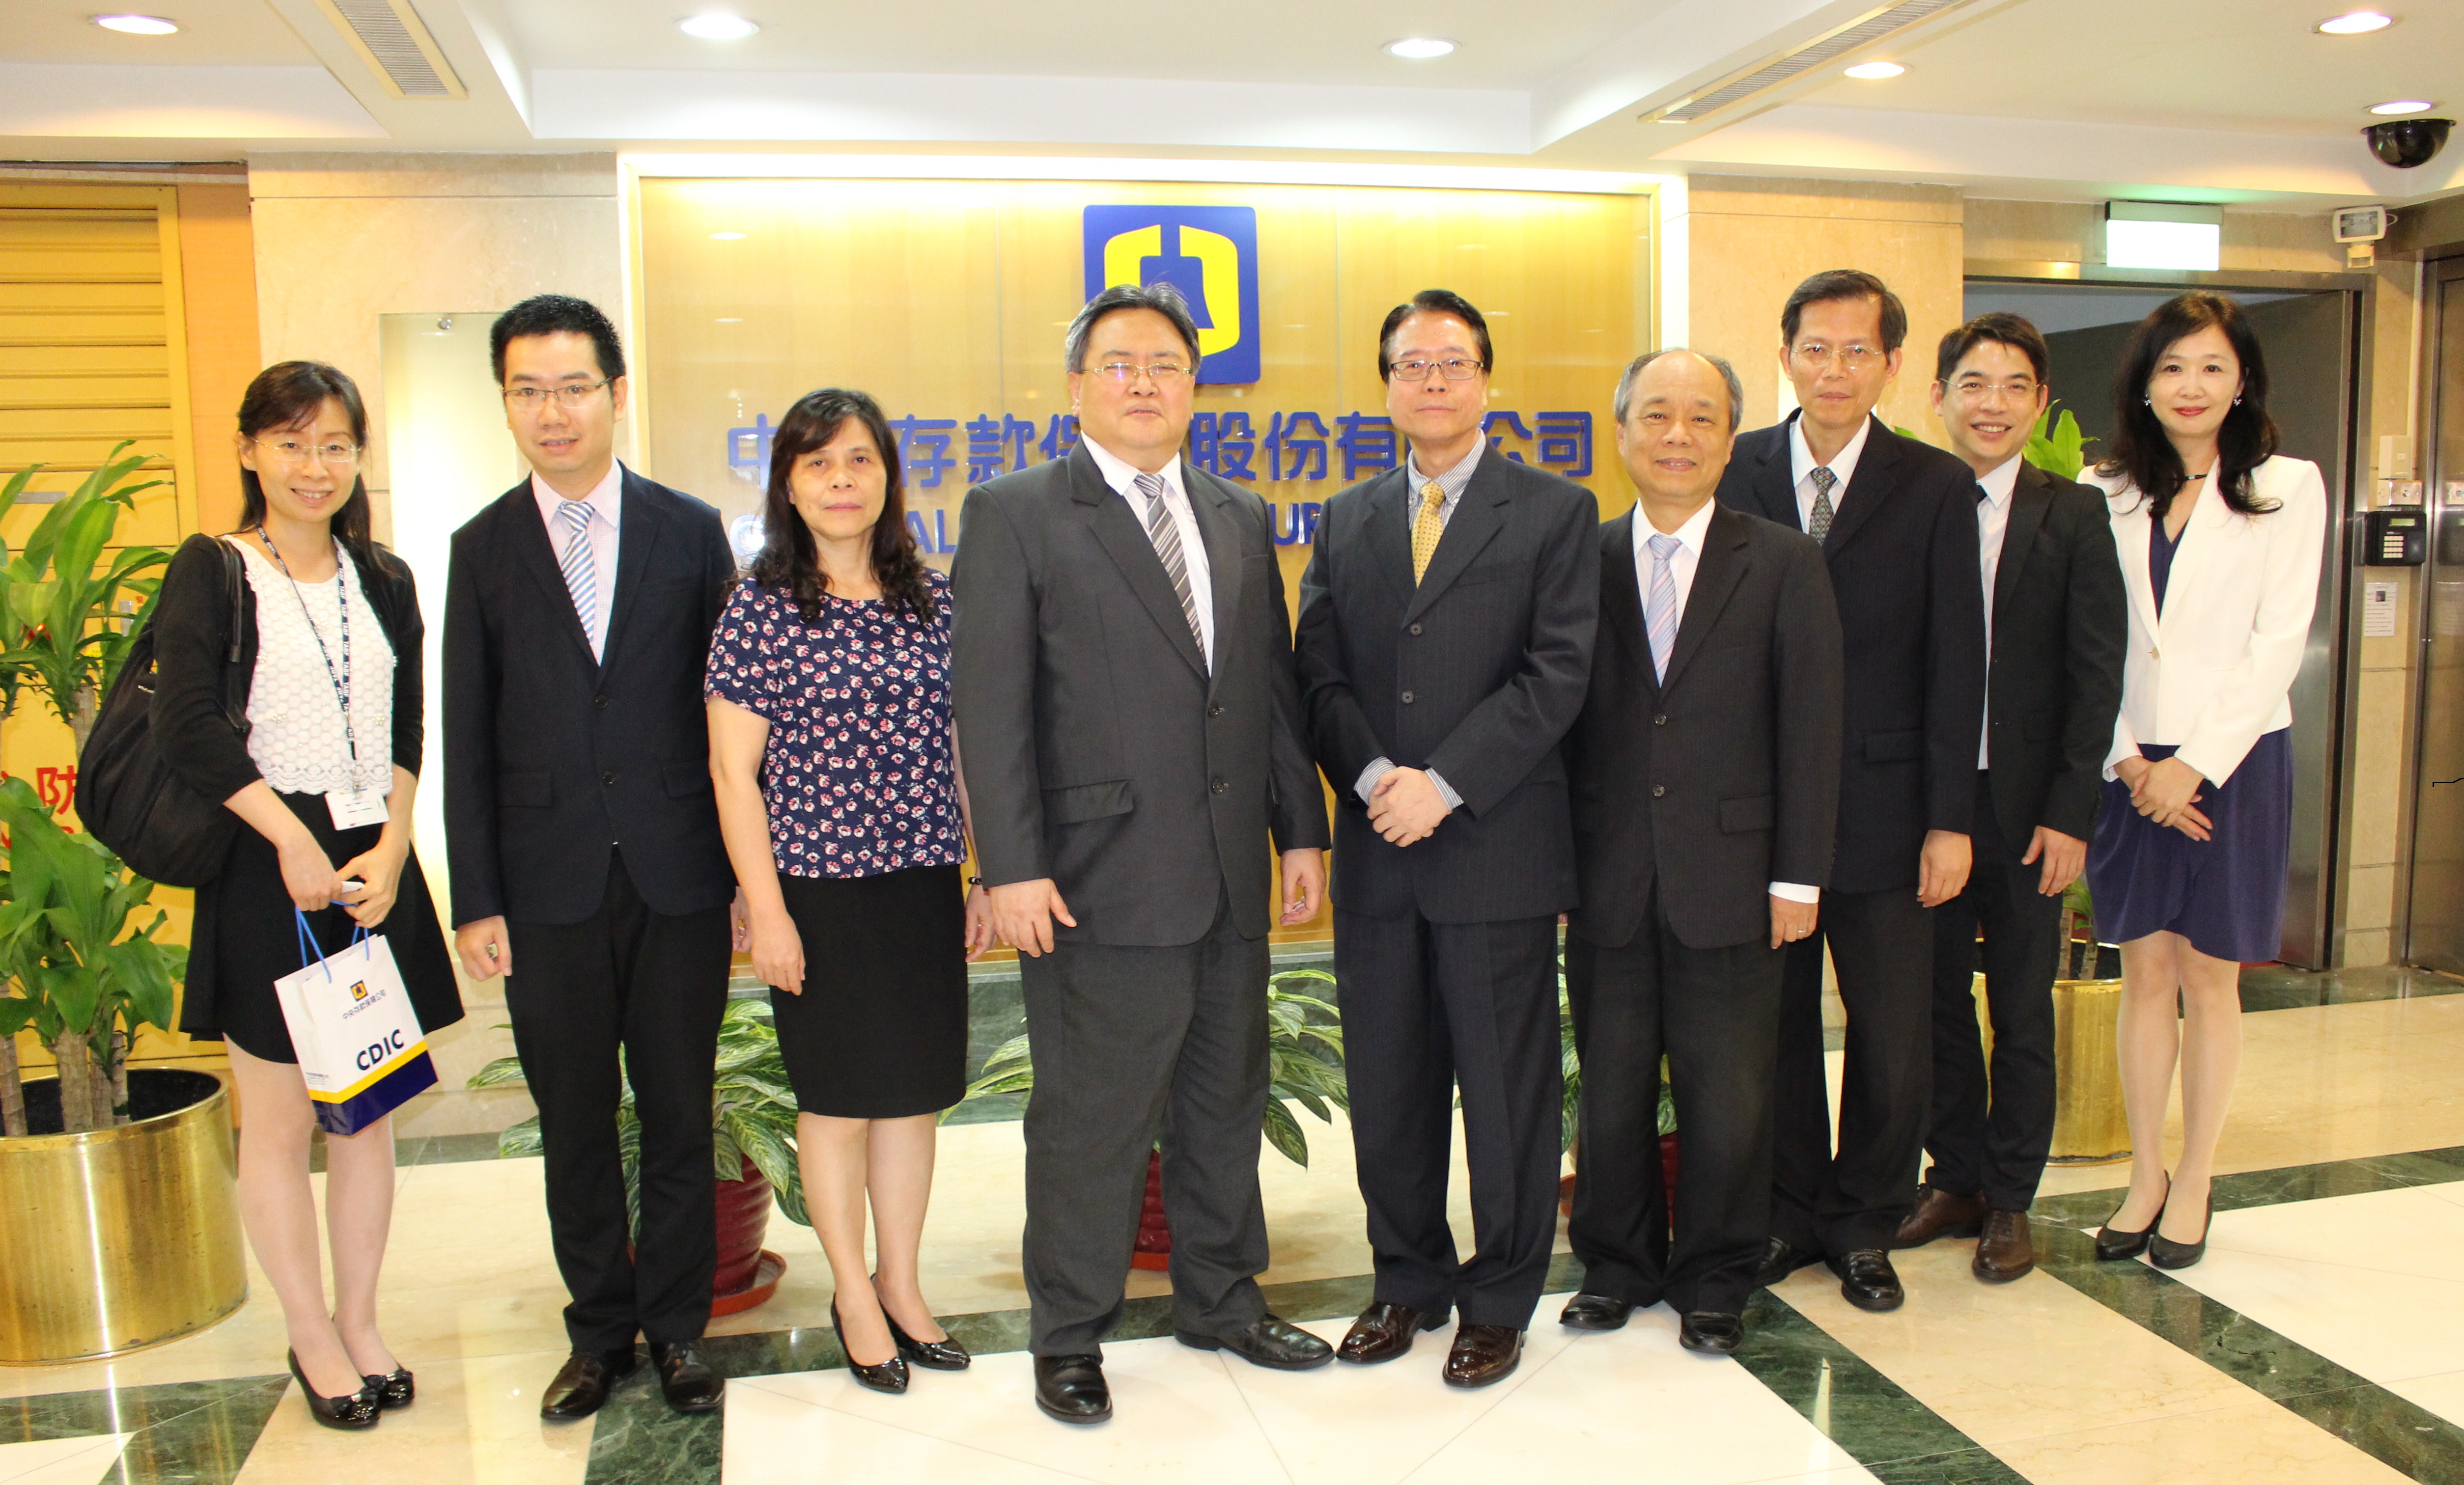 Group photo of Mr．Restituto C．Cruz from the Bangko Sentral ng Pilipinas （4th from the left）， Mrs．Ho Thi Ha （3rd from the left） and Mr．Nguyen Hoai Nam （2nd from the left） from the State Bank of Vietnam， Ms．Ti-Chen Chen from the TABF， together with the CDIC Chairman Dr．Paul C．D．Lei （5th from the right）， President Michael Lin （4rd from the right）， Executive Vice President William Su （3nd from the right） and International Relations and Research Office Director Yvonne Fan （1st from the right）．